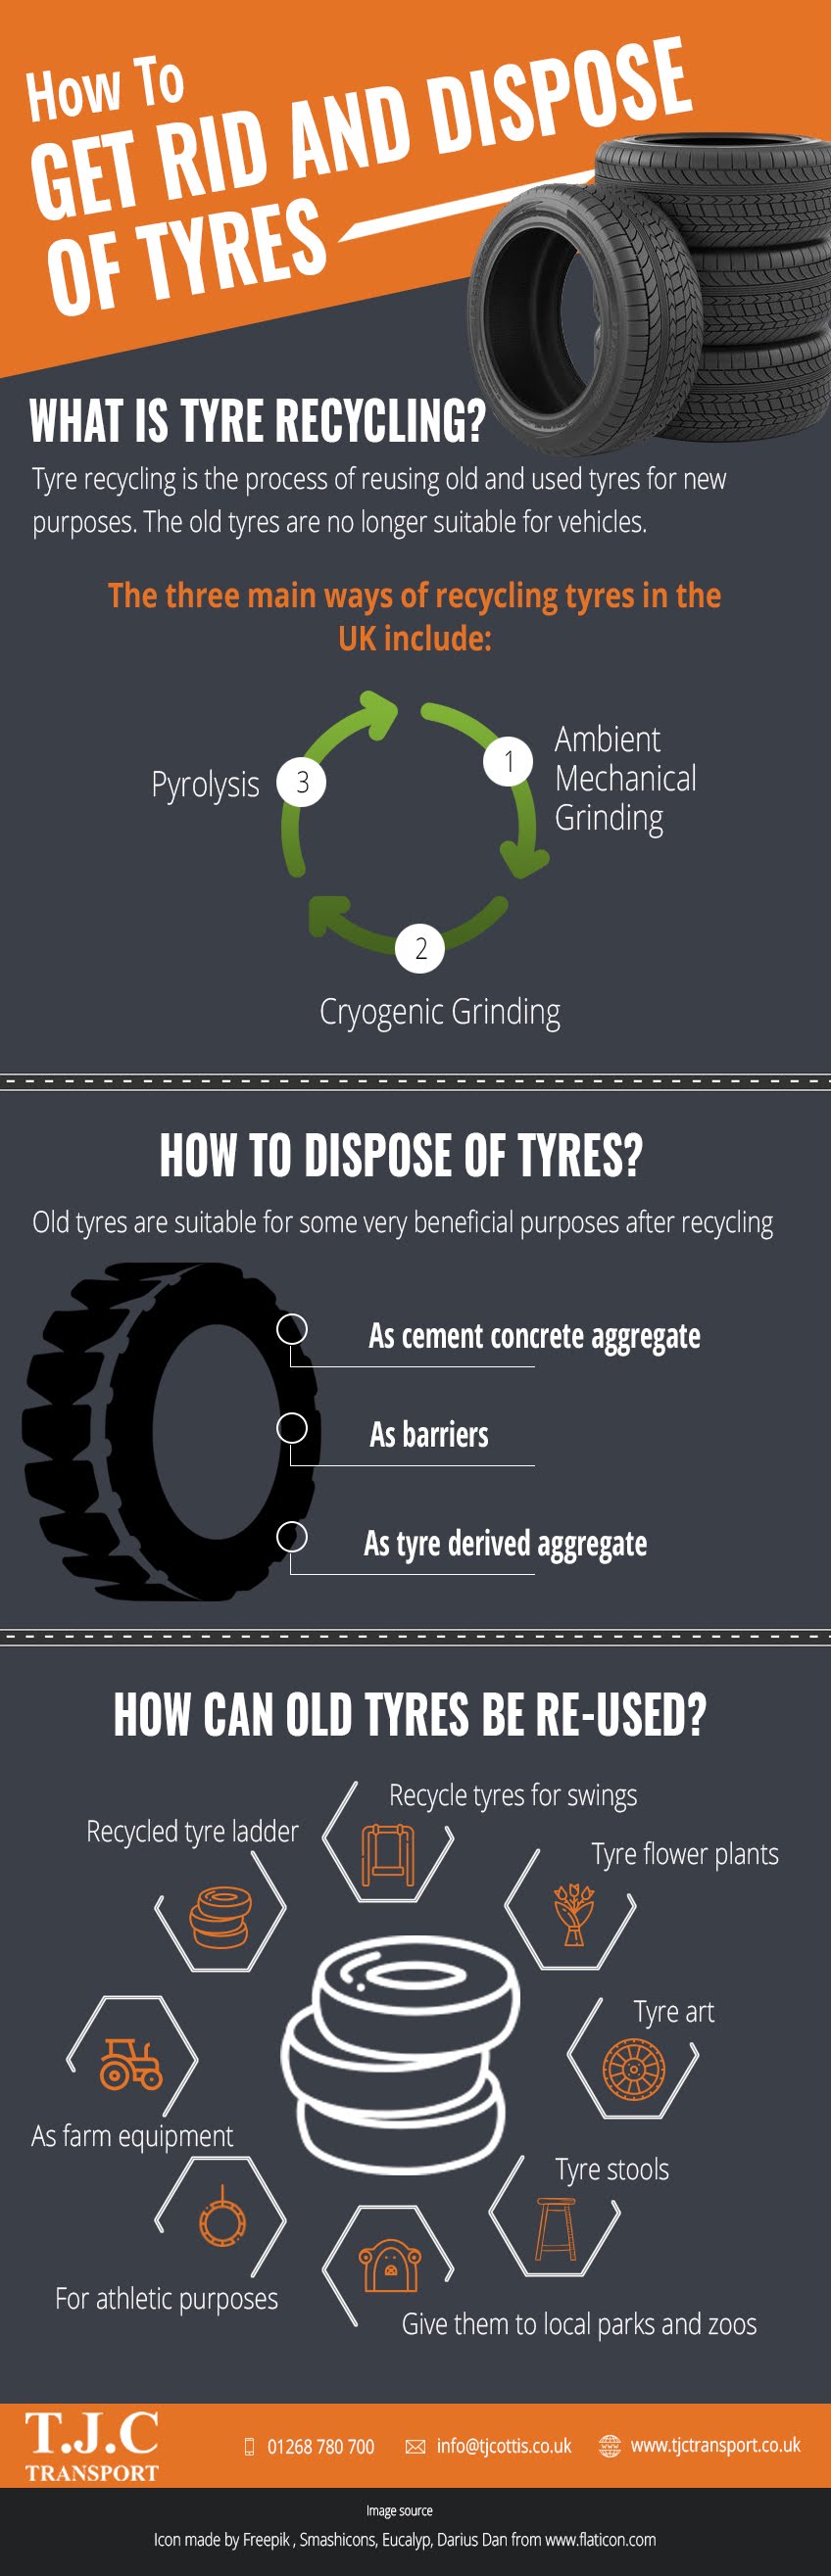 How To Get Rid And Dispose Of Tyres #infographic